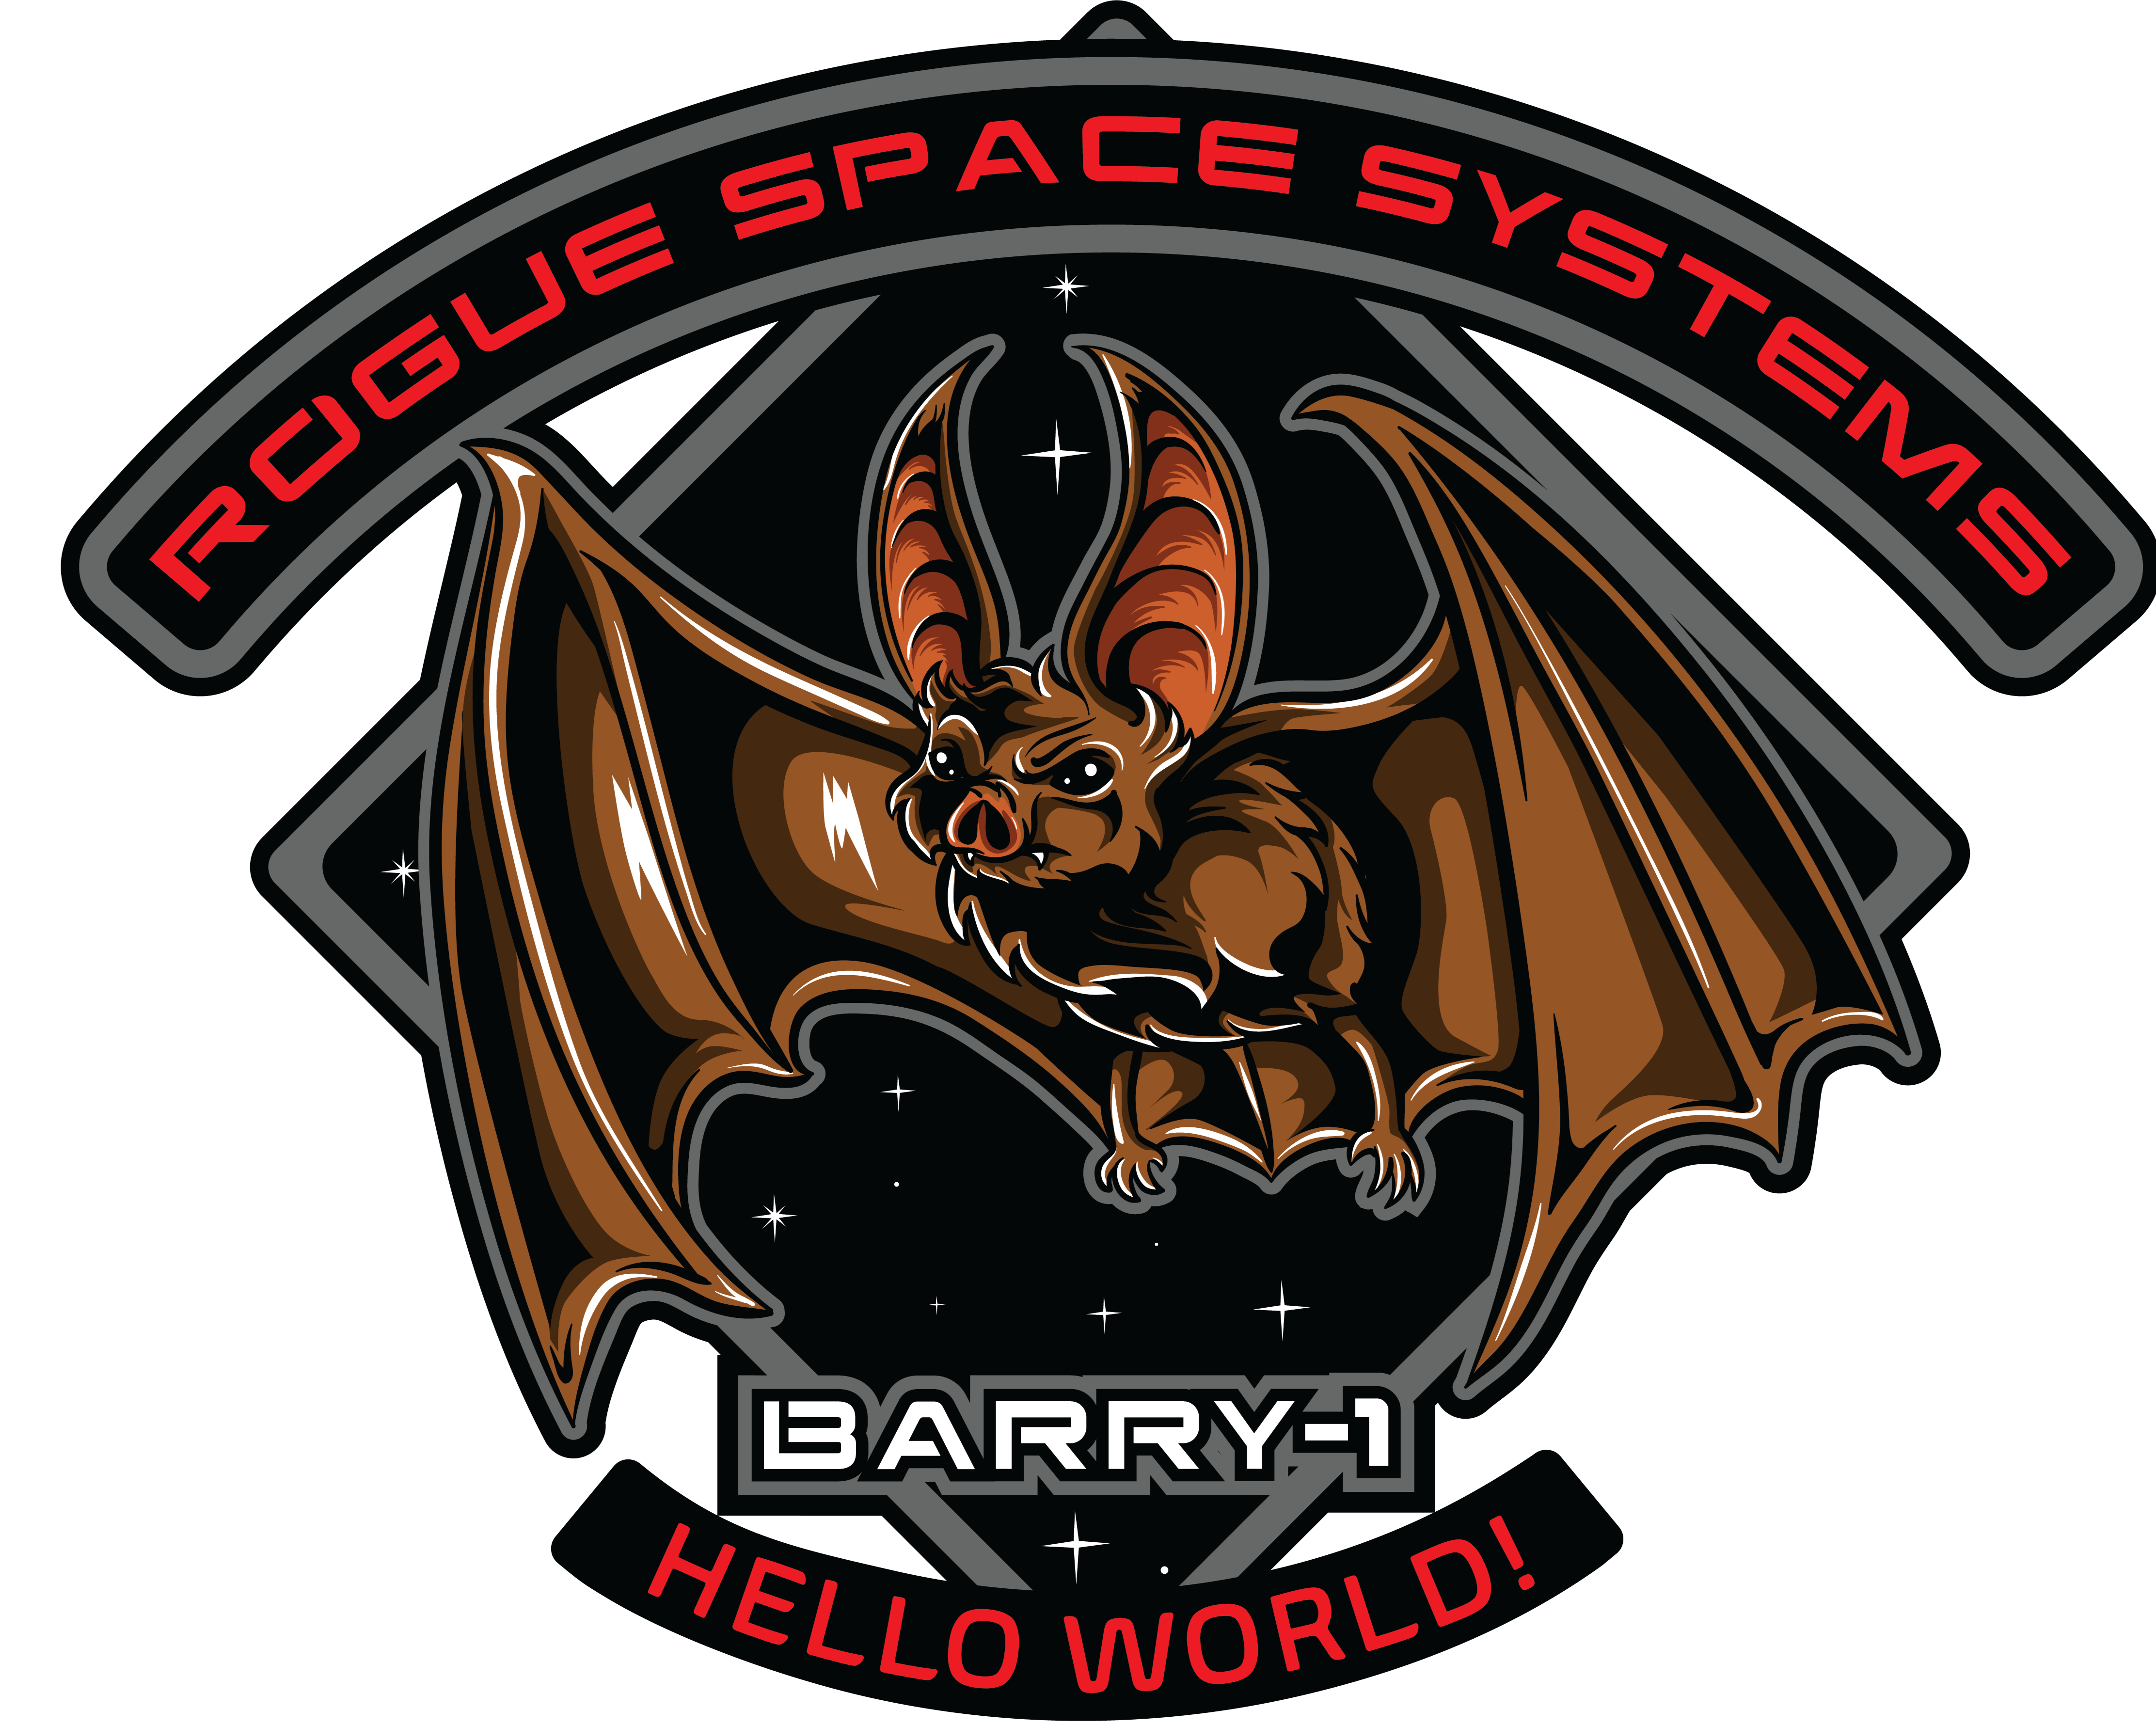 Rogue Space Systems - Barry-1 - PVC